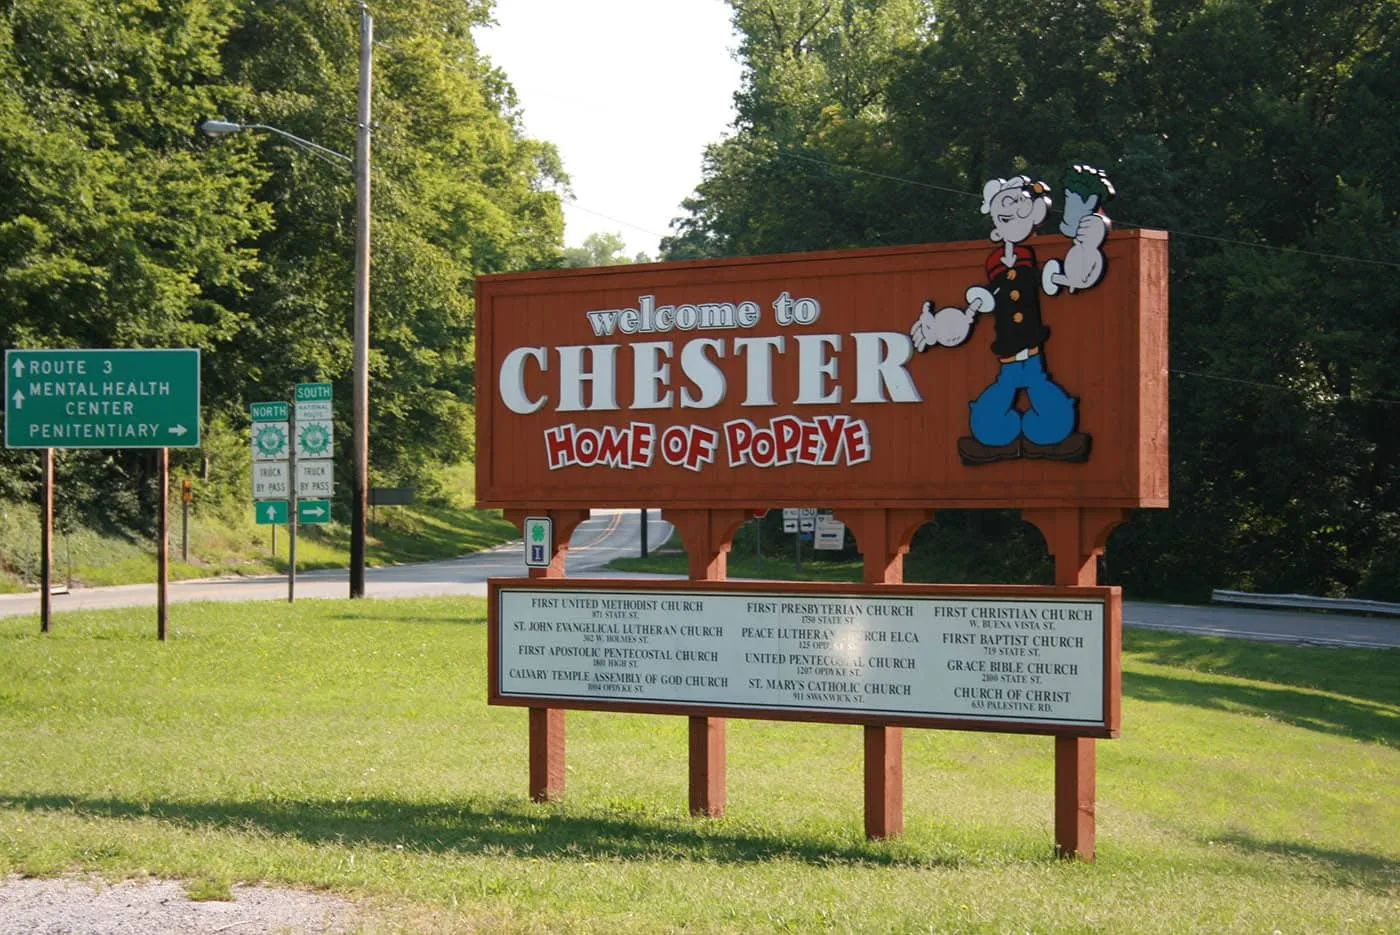 Chester, Illinois - The Home of Popeye The Sailor Man - Popeye Character Trail in Chester, Illinois